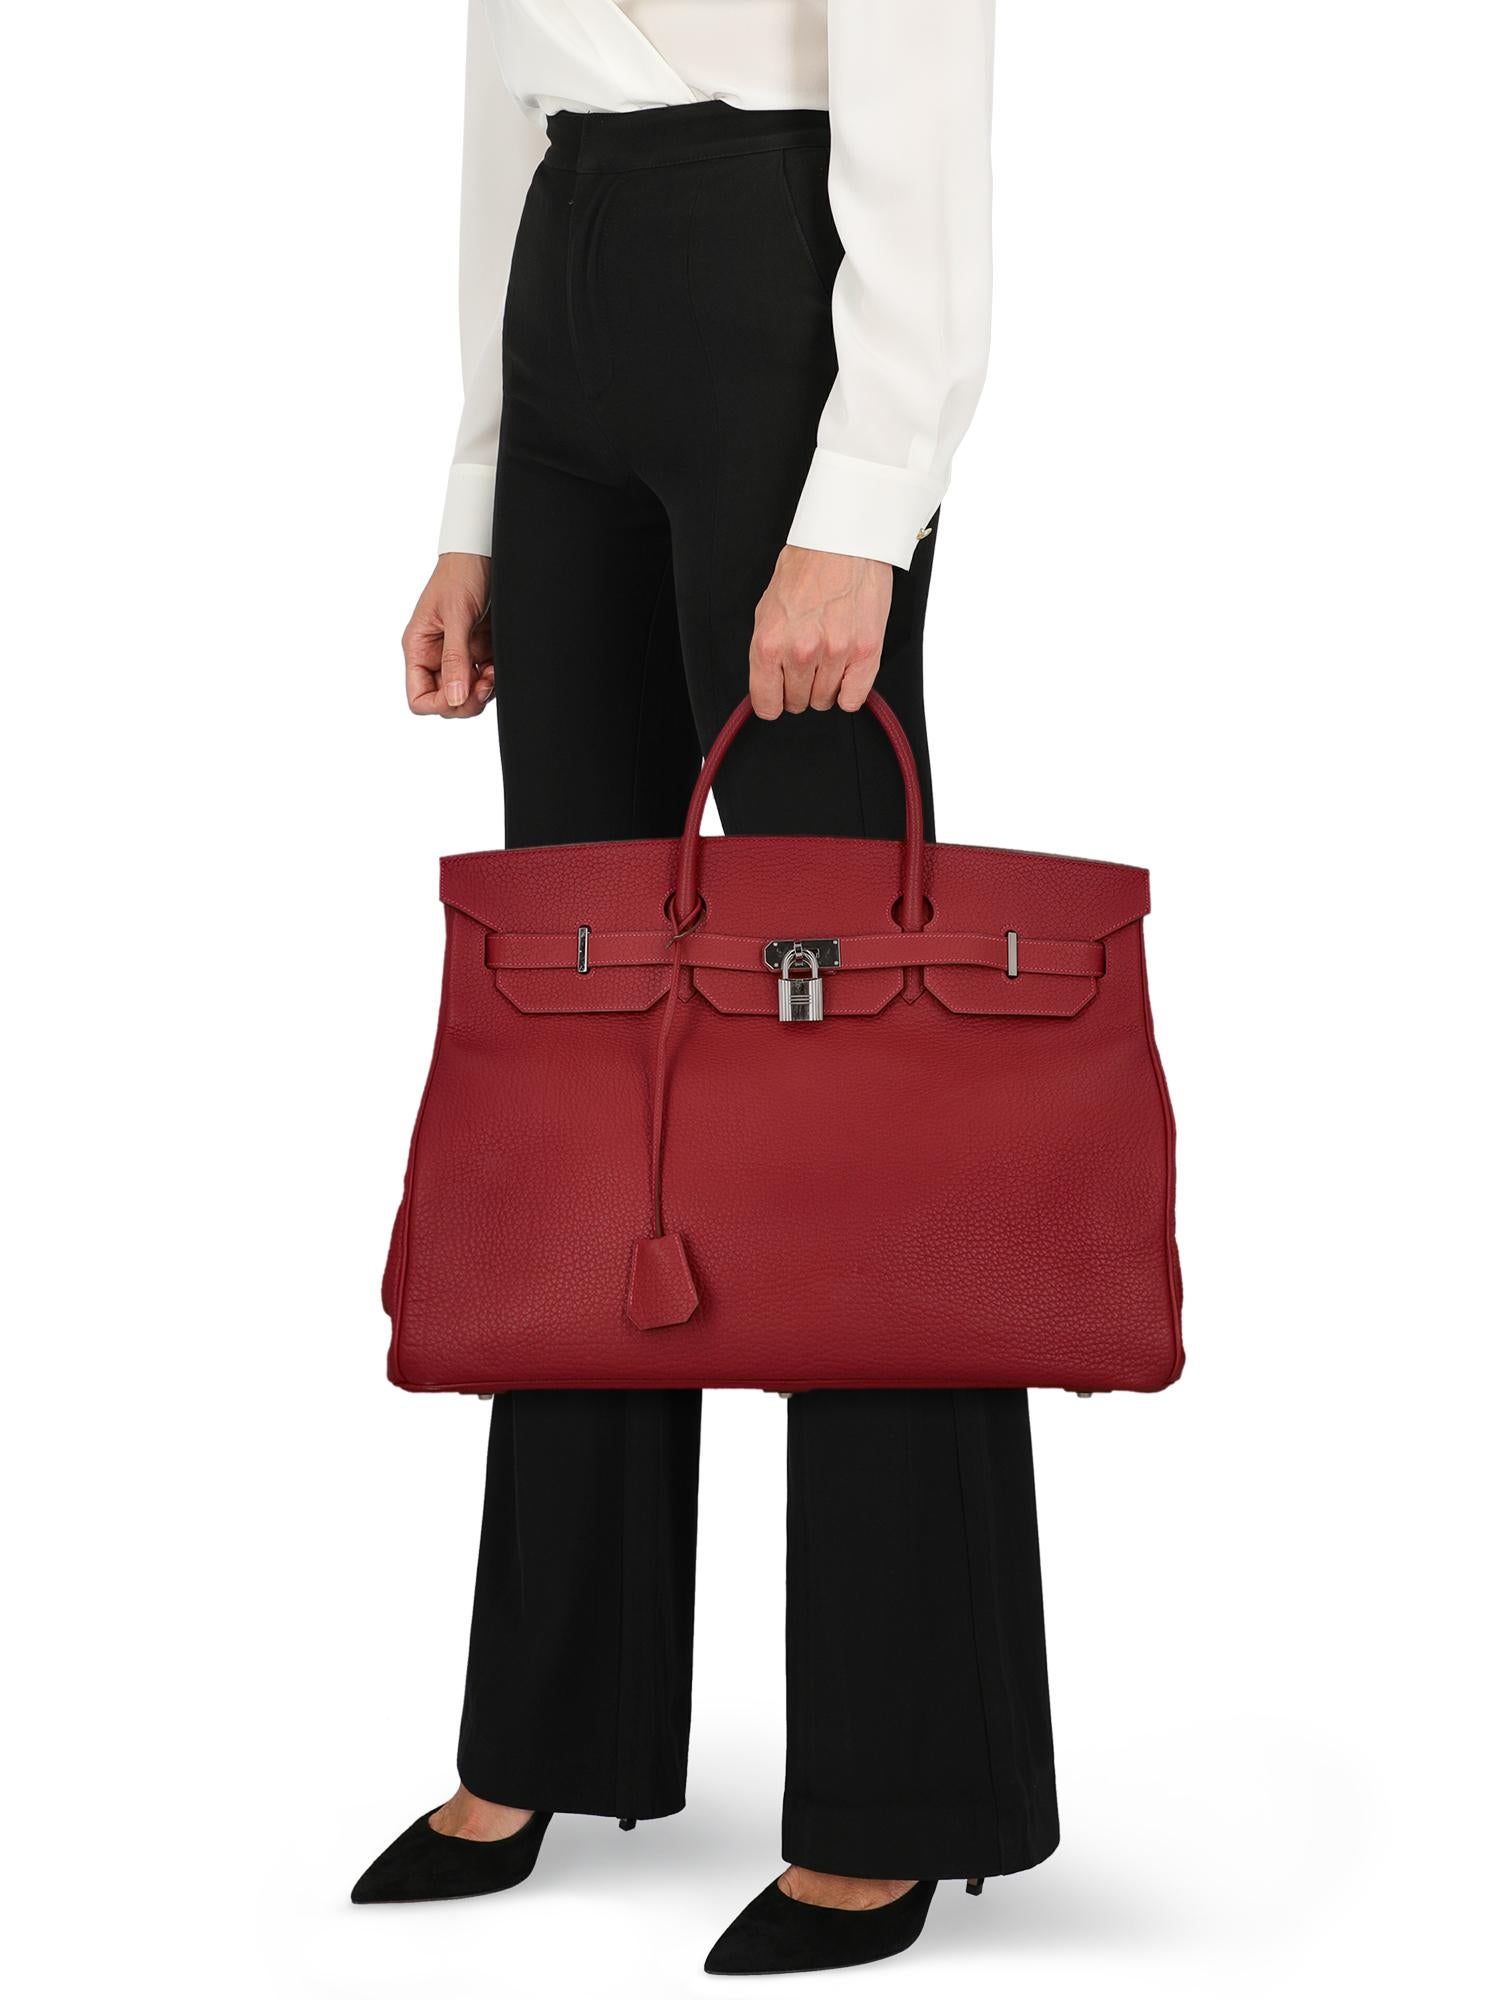 Product Description: Birkin voyage, rouge garance, veau togo, leather, solid color, printed logo, turn-lock closure, silver-tone hardware, internal zipped pocket, day bag

Includes: 
- Lock
- Key
- Clochette
- Dust bag

Product Condition: Very